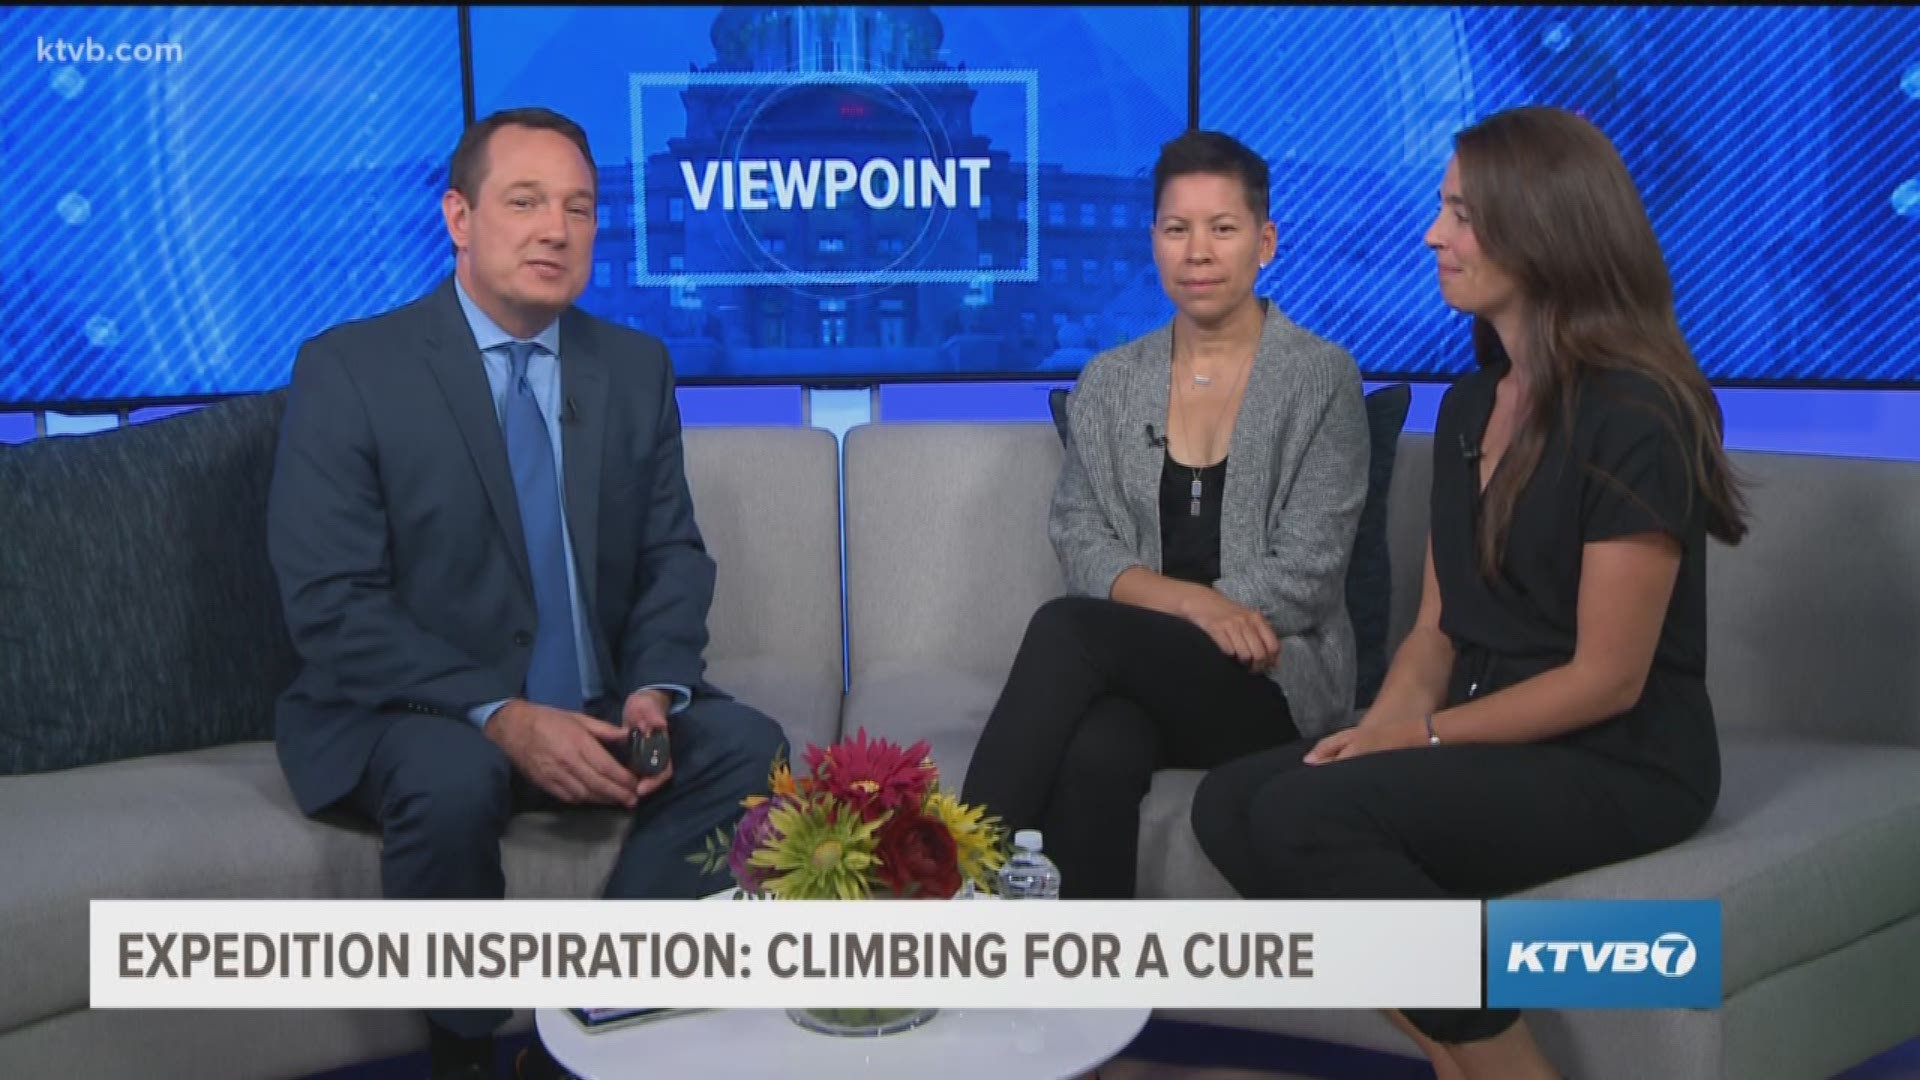 A Boise-based non-profit focused on the fight against breast cancer called 'Expedition Inspiration' is raising funds for cancer research by climbing some of Idaho's tallest peaks (part 2).